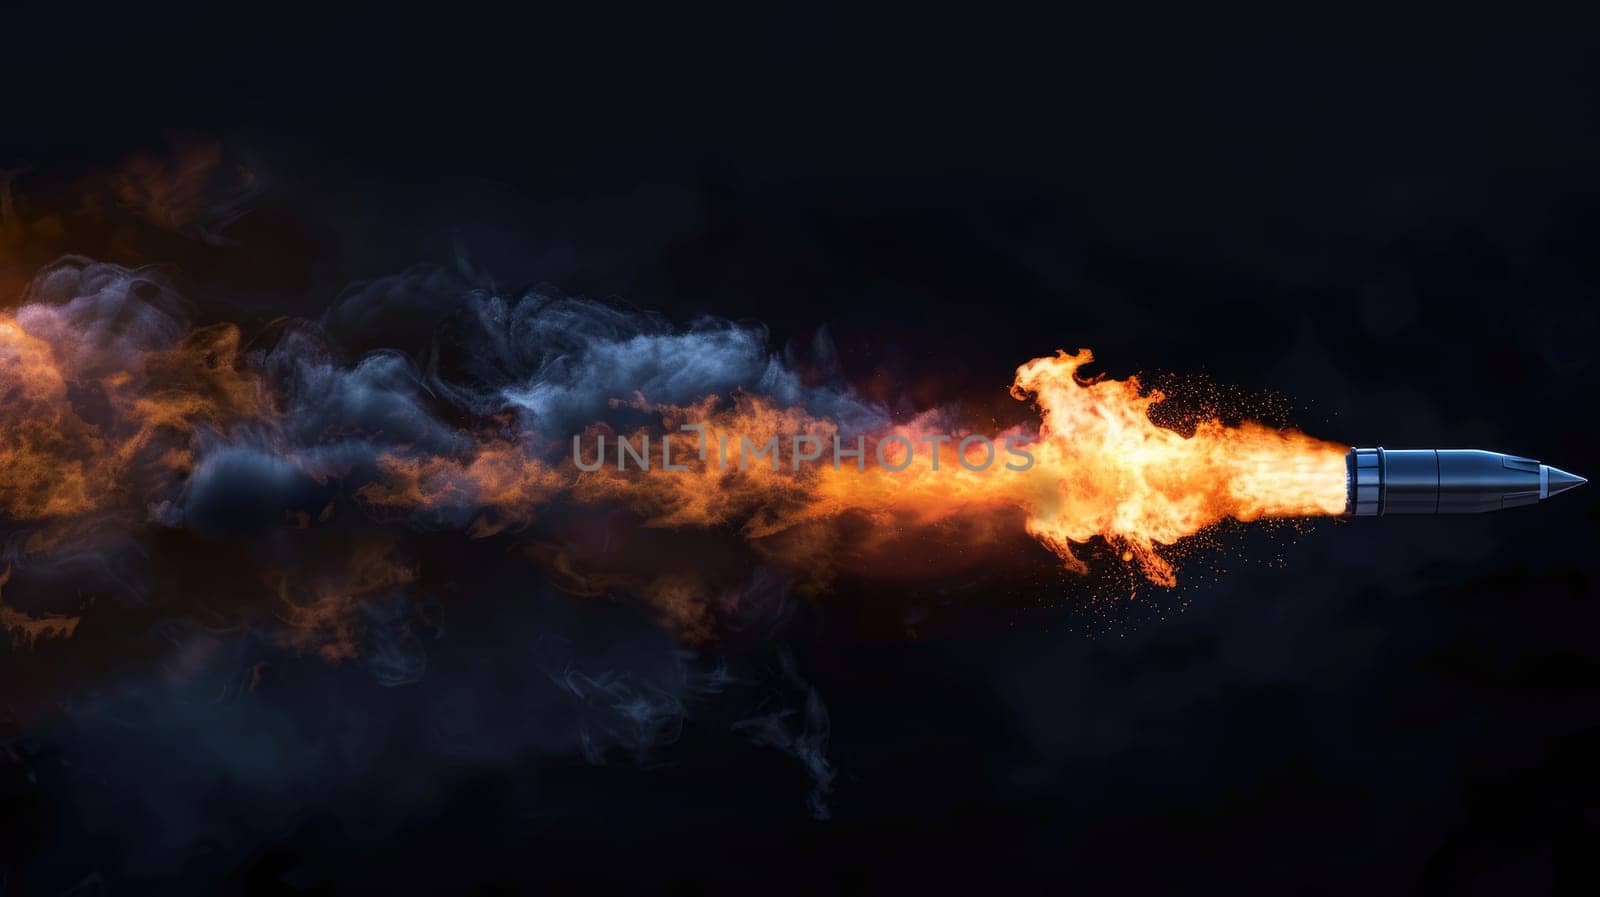 Fire and smoke from a rocket engine on a black background by nijieimu